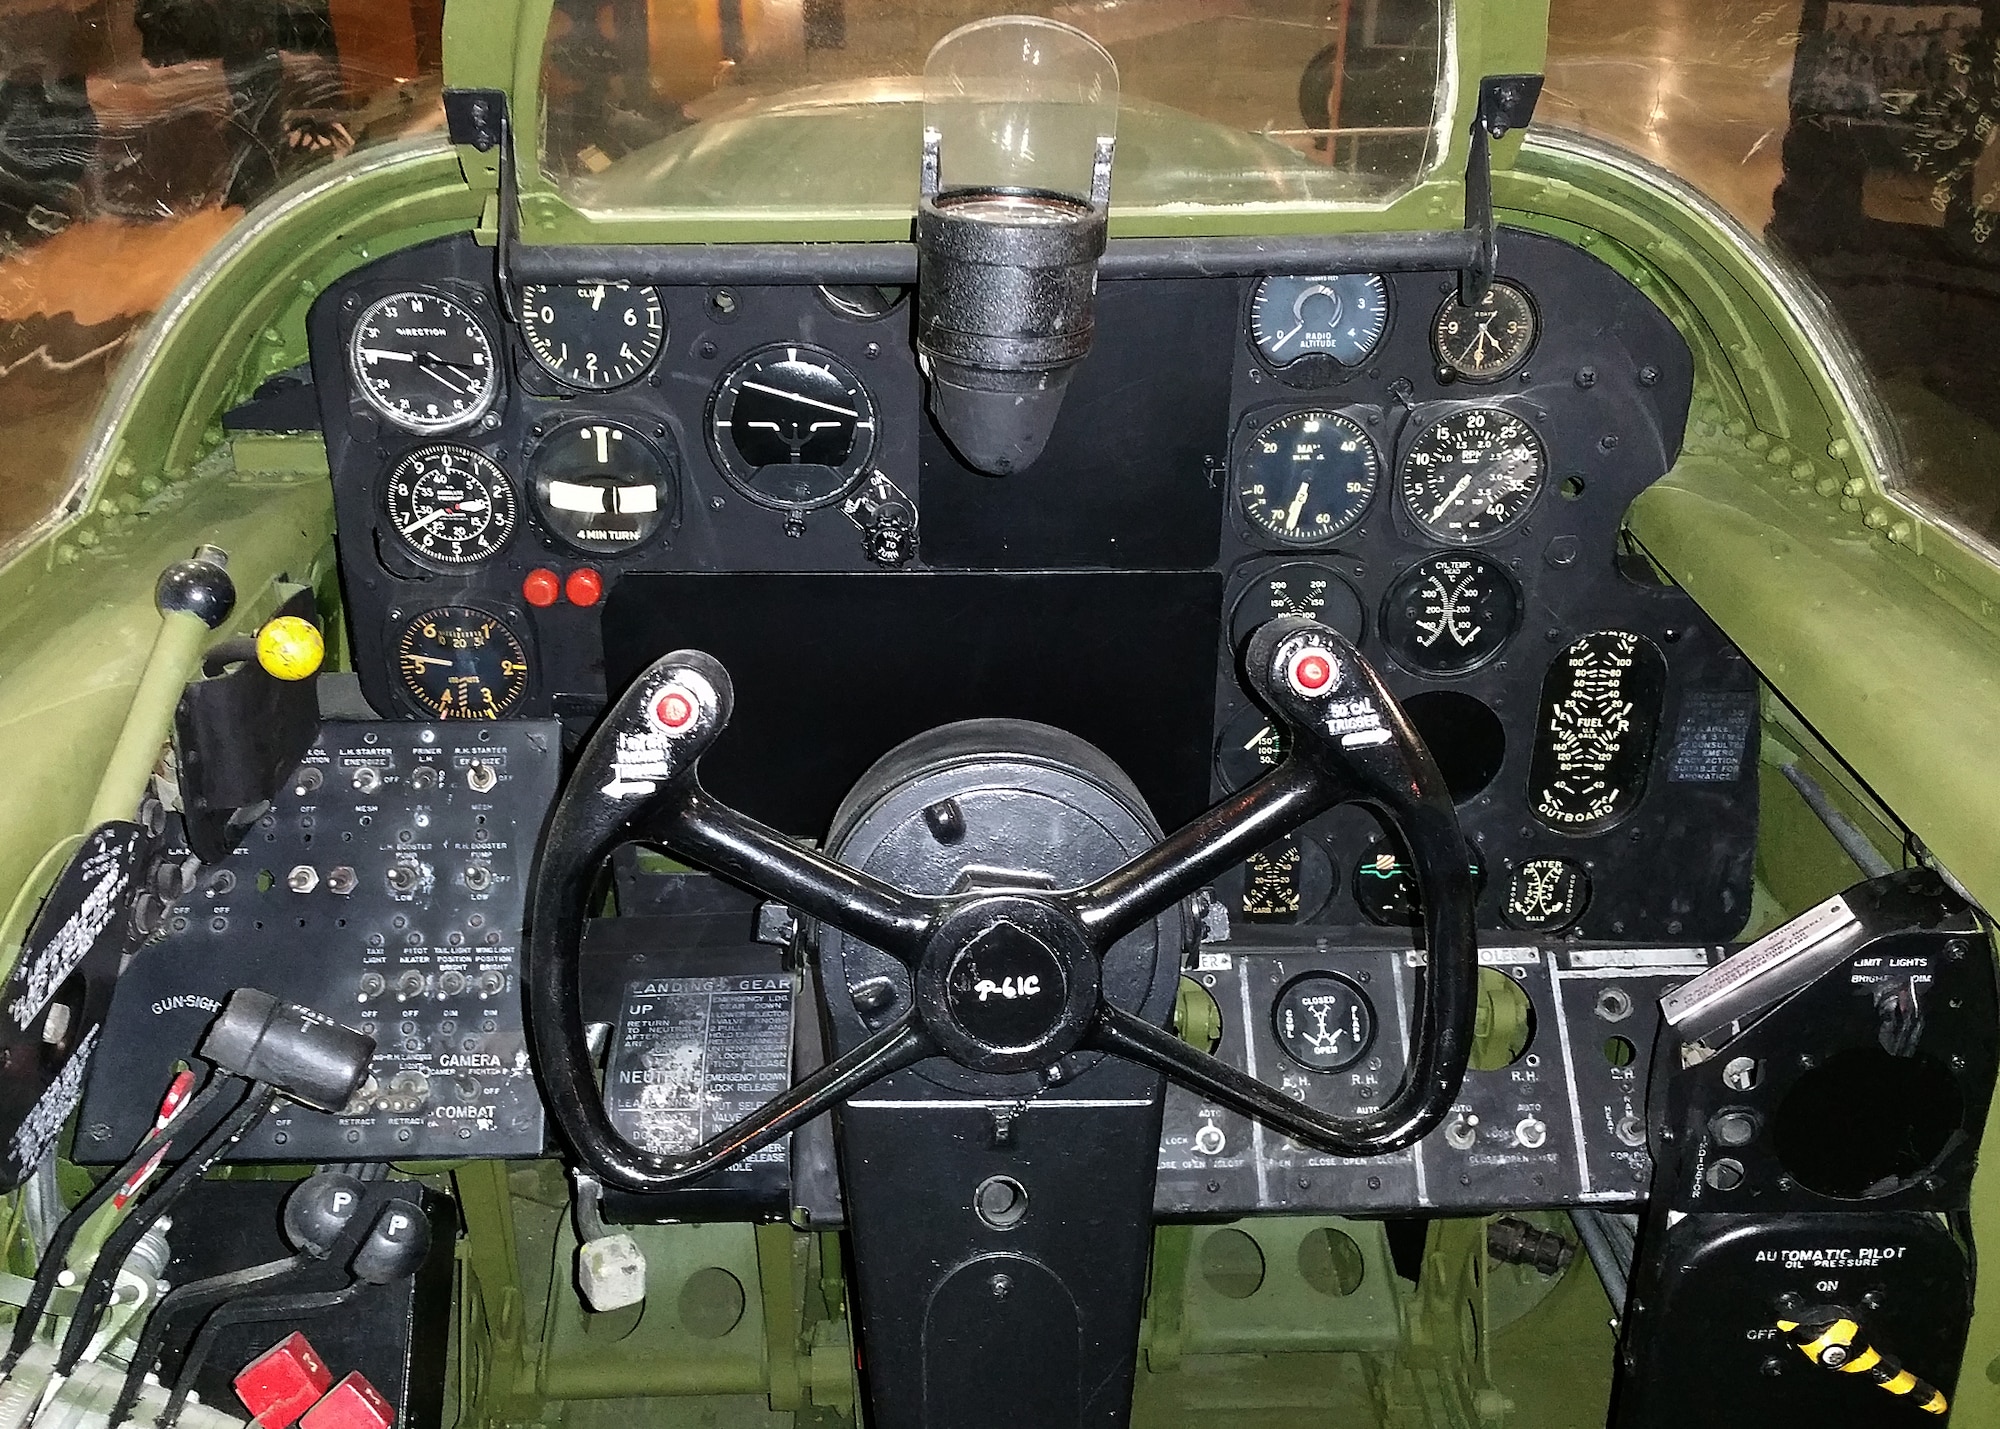 DAYTON, Ohio - Northrop P-61C cockpit in the WWII Gallery at the National Museum of the U.S. Air Force. (U.S. Air Force photo)